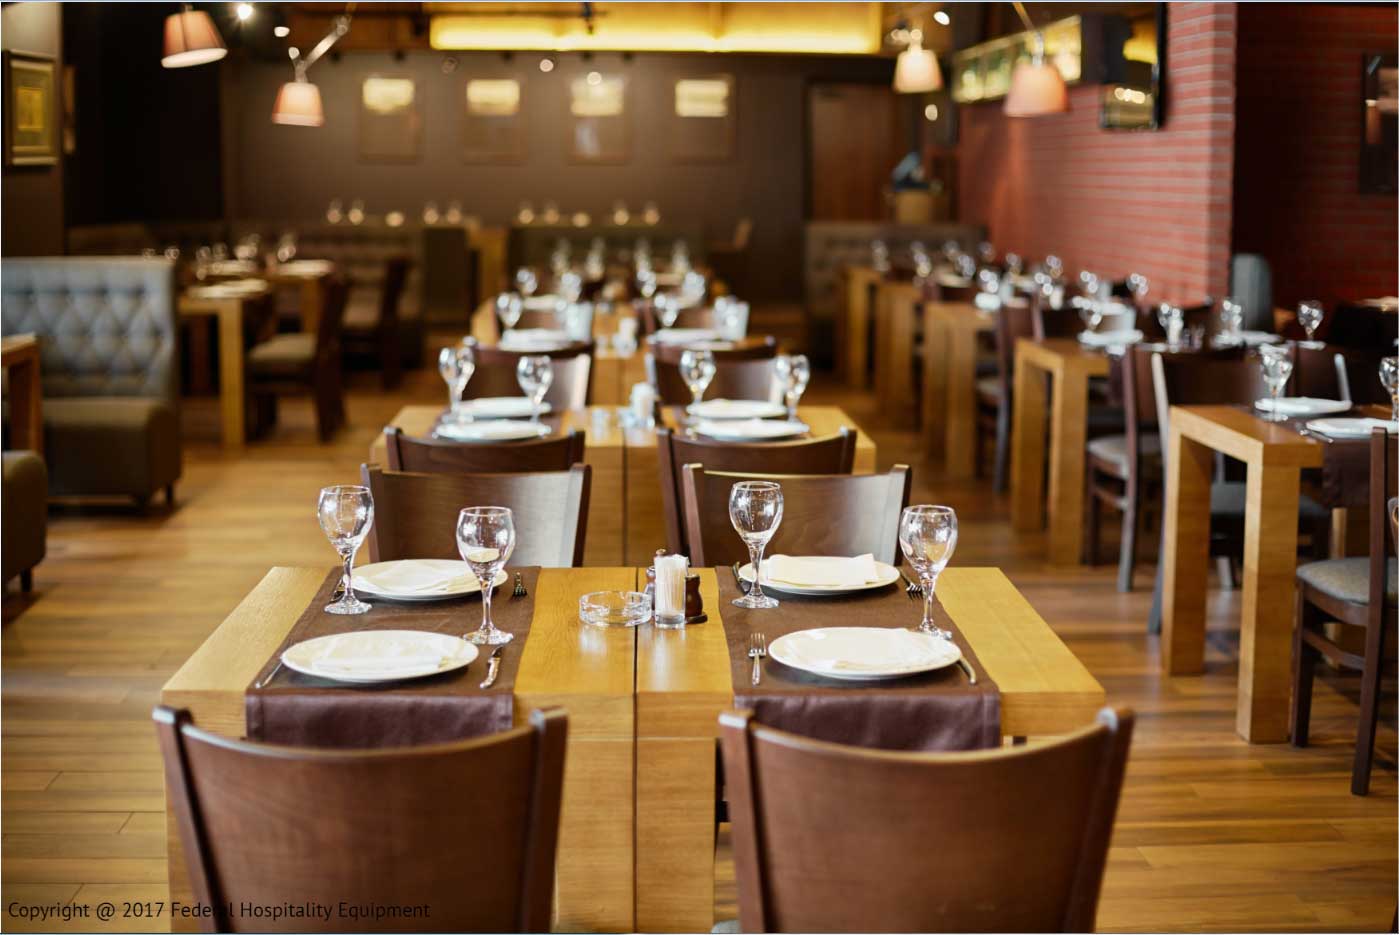 How to Clean your restaurant furniture